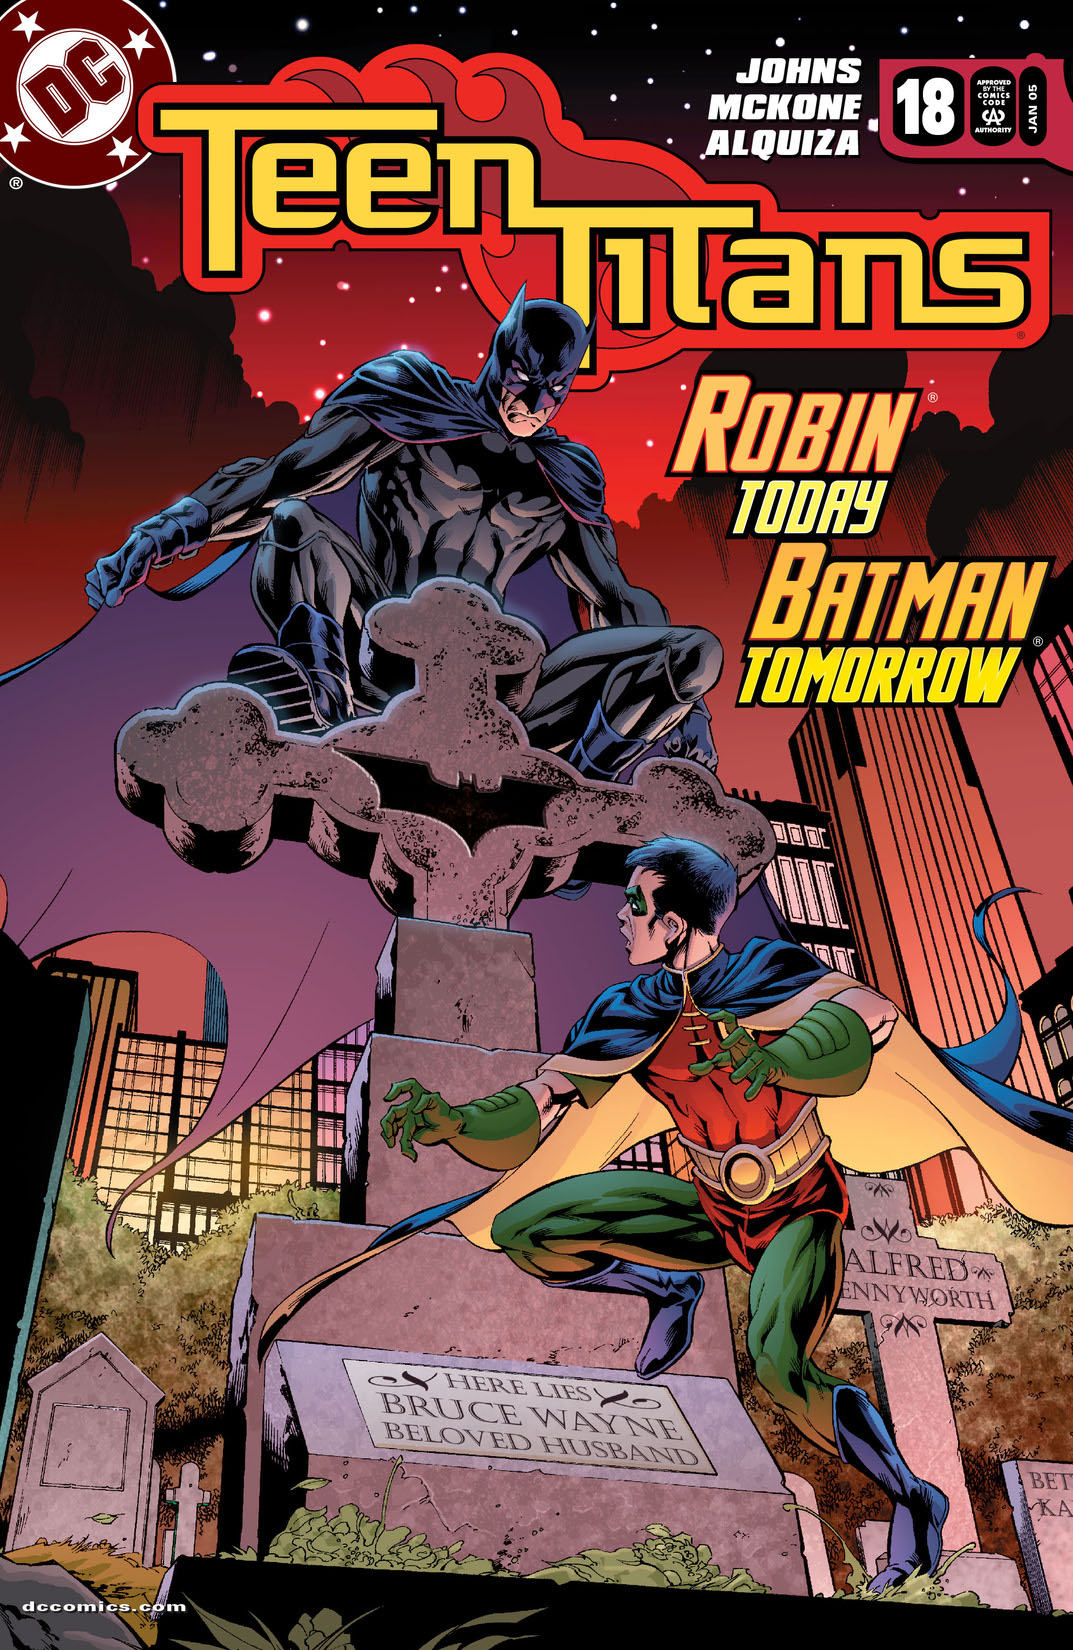 Teen Titans (2003-) #18 preview images